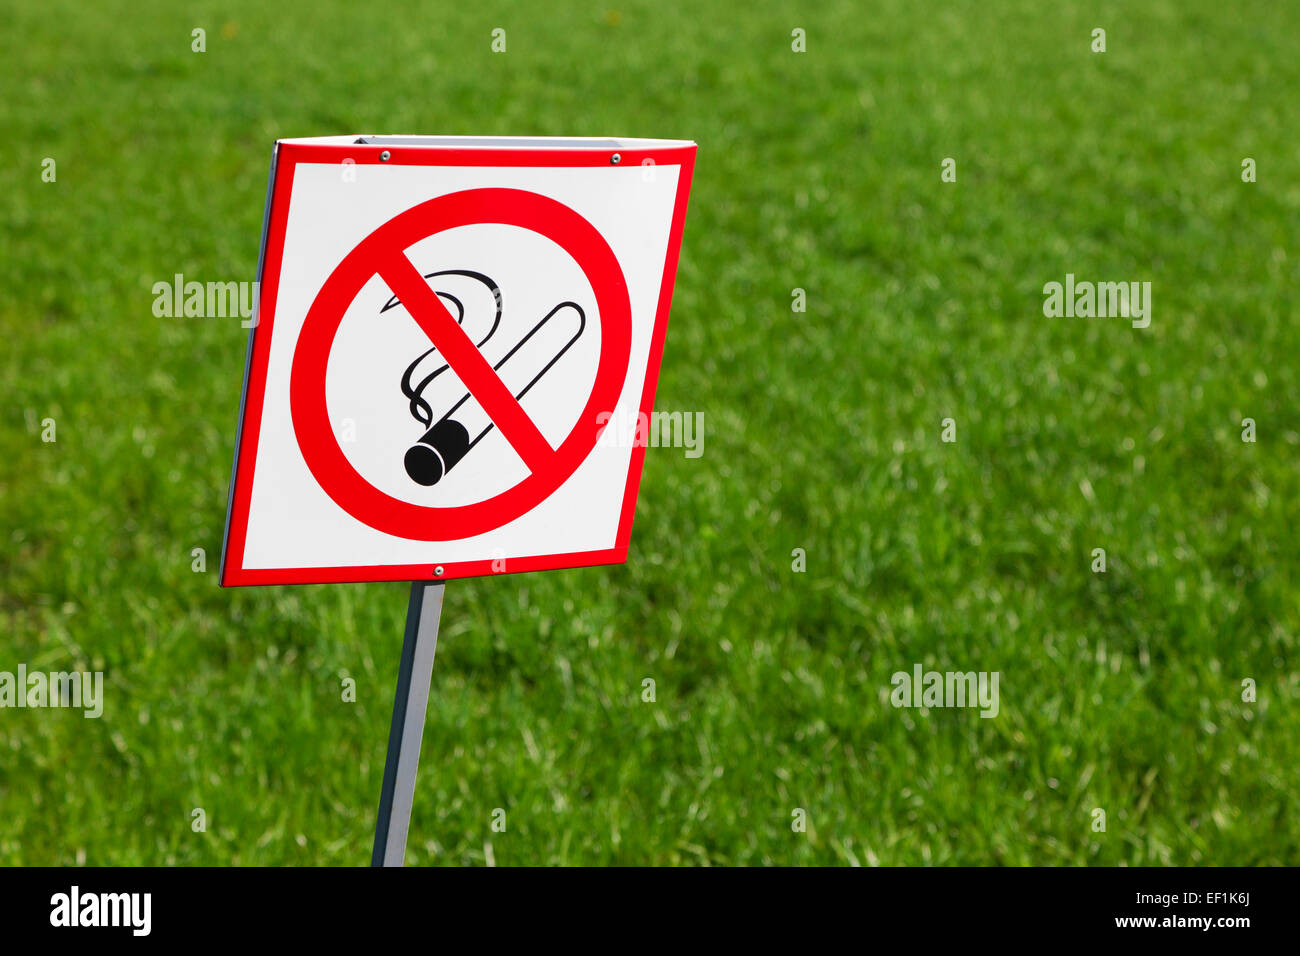 No smoking sign on green grass background Stock Photo